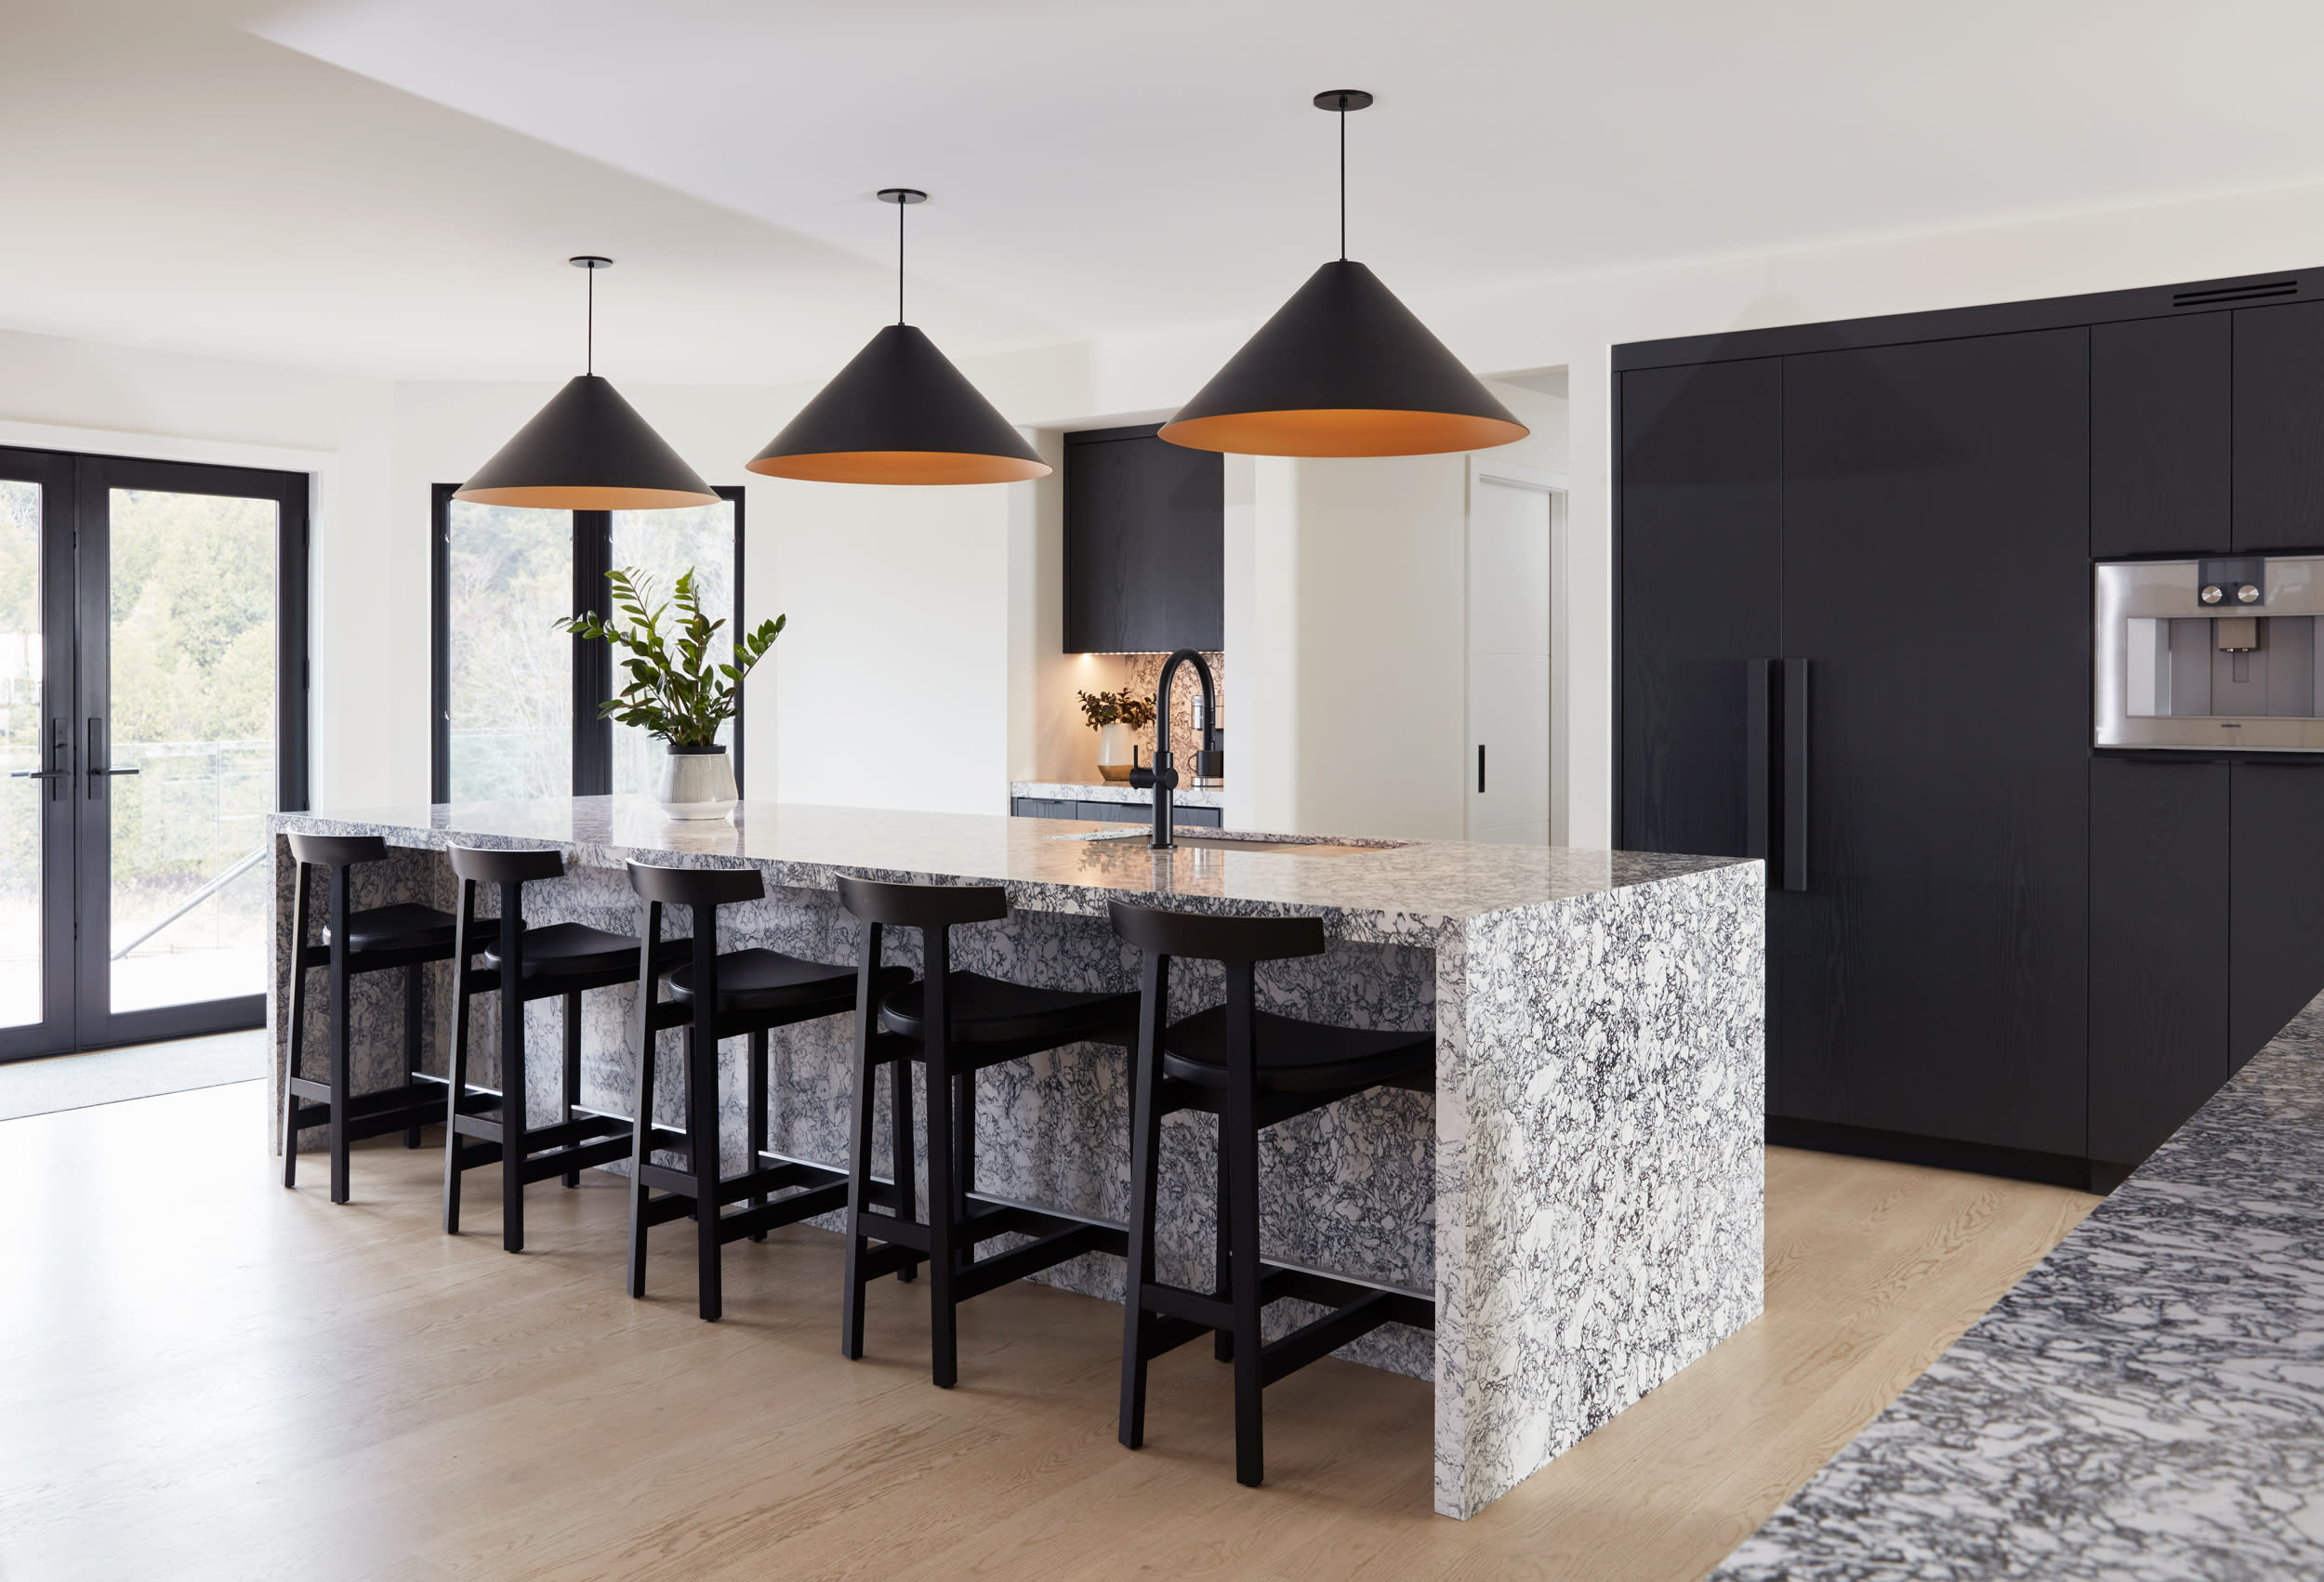 Overview from of kitchen space with waterfall island and painted black cabinets